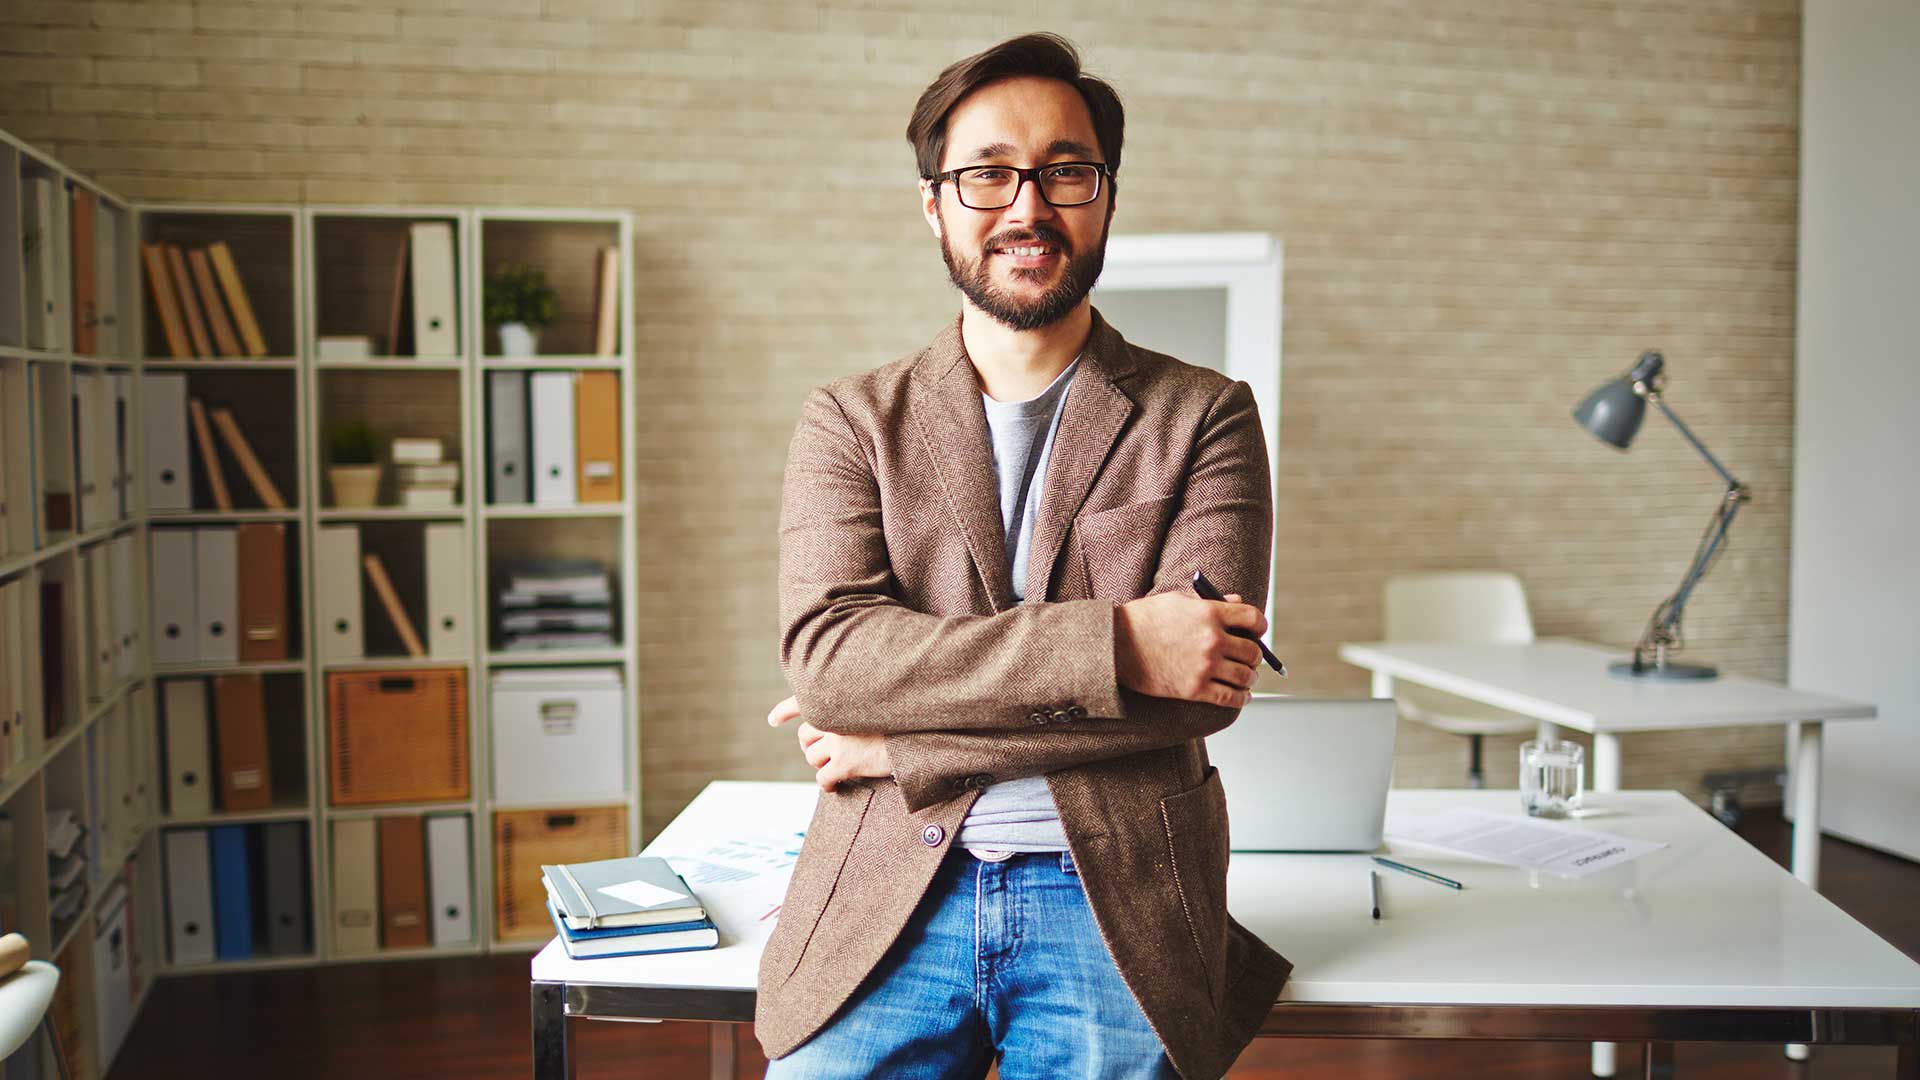 Professional man leaning on desk with a smile and crossed arms